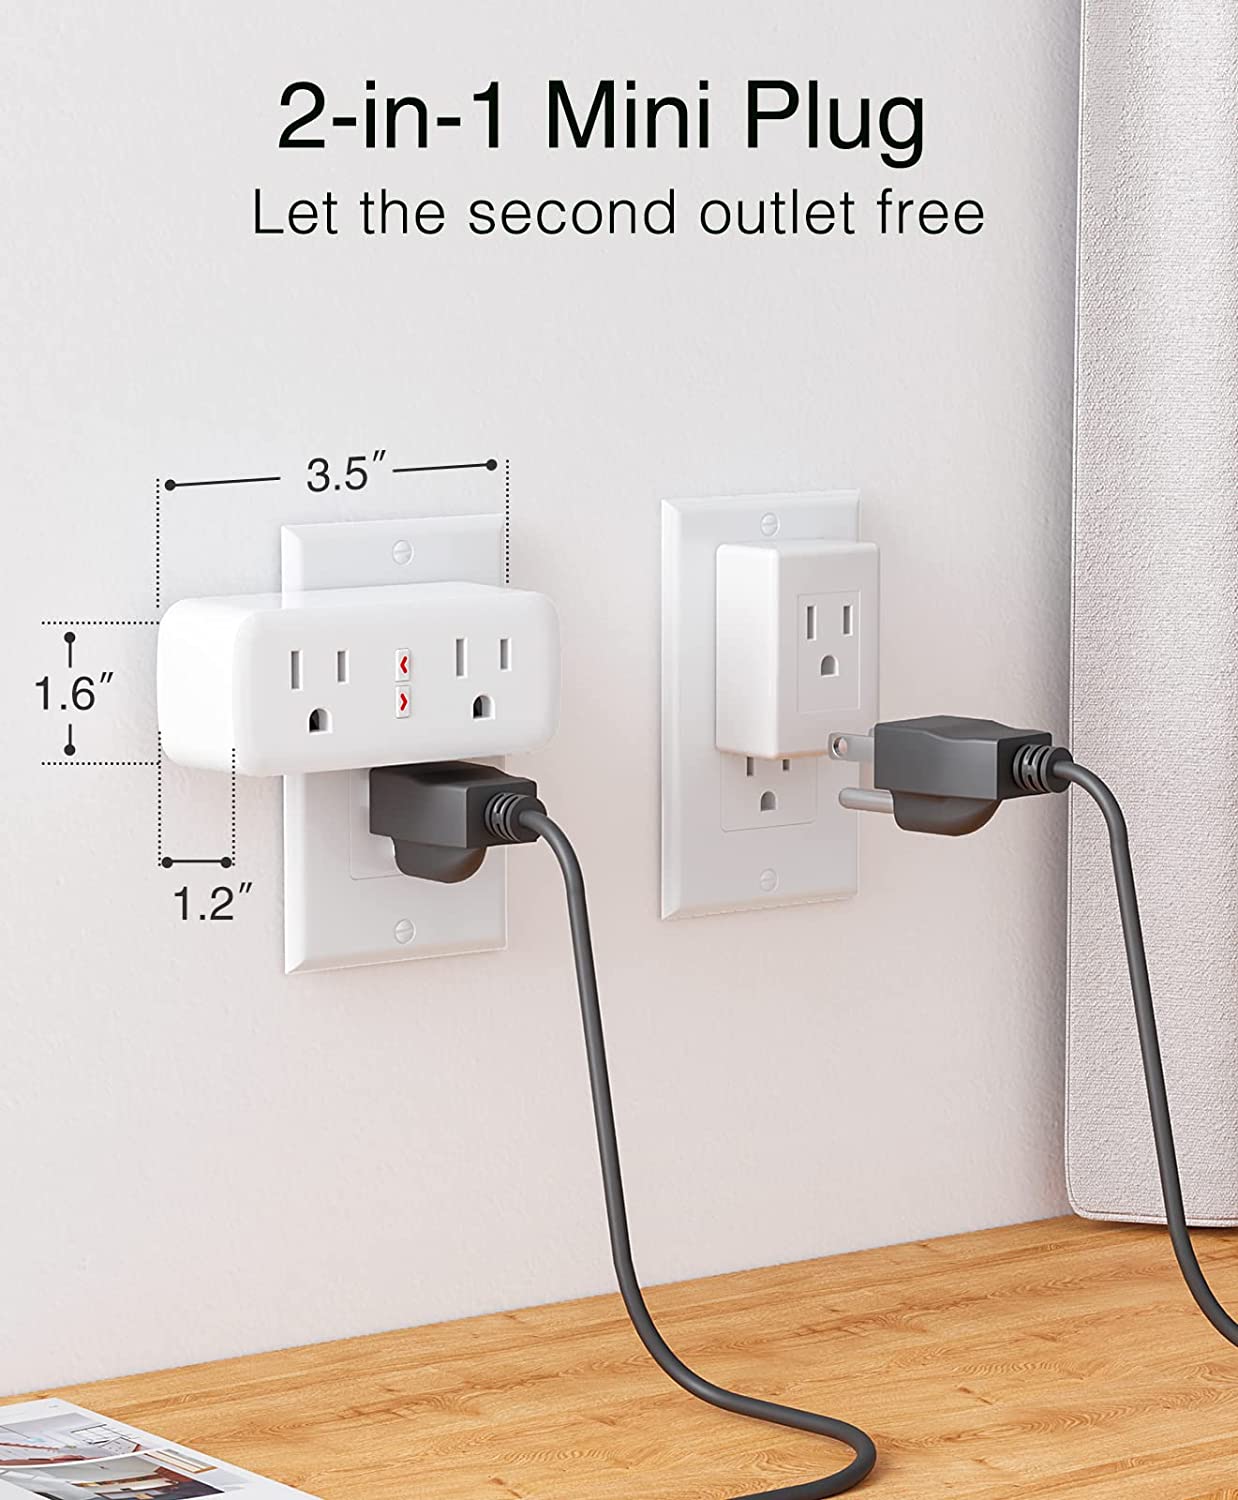 GHome Smart Mini Plug, Wi-Fi Outlet Extender Surge Protector Dual Smart Socket Compatible with Alexa or Google Home, Independently Or Together Control, FCC Listed (2 Pack), White